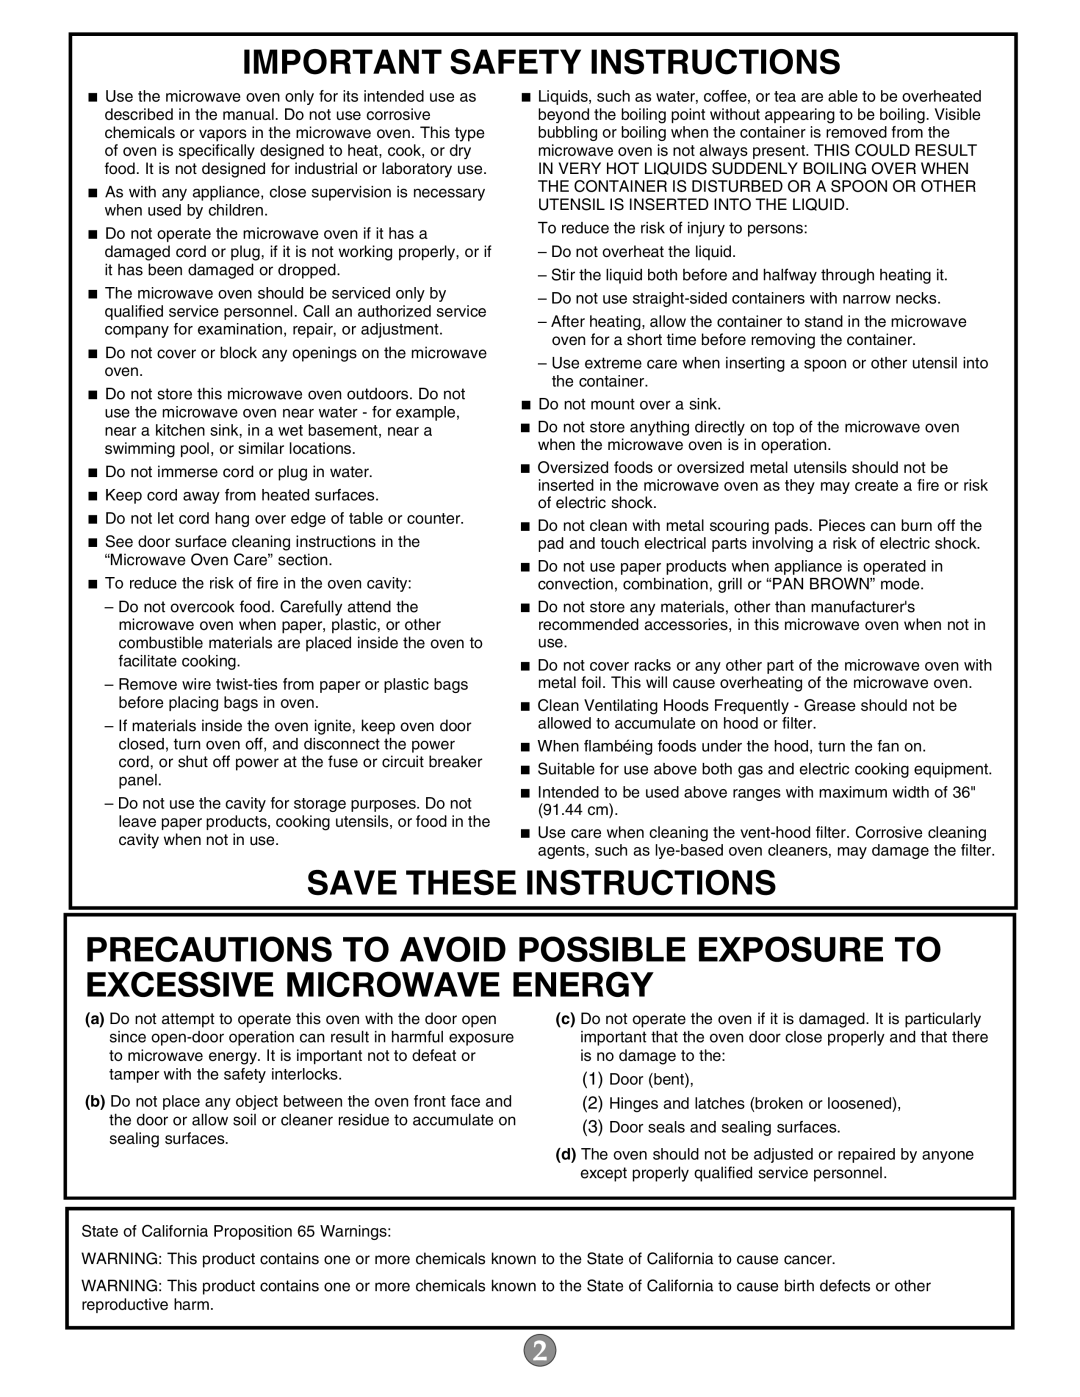 KitchenAid W10644757A Precautions To Avoid Possible Exposure To Excessive Microwave Energy, Important Safety Instructions 